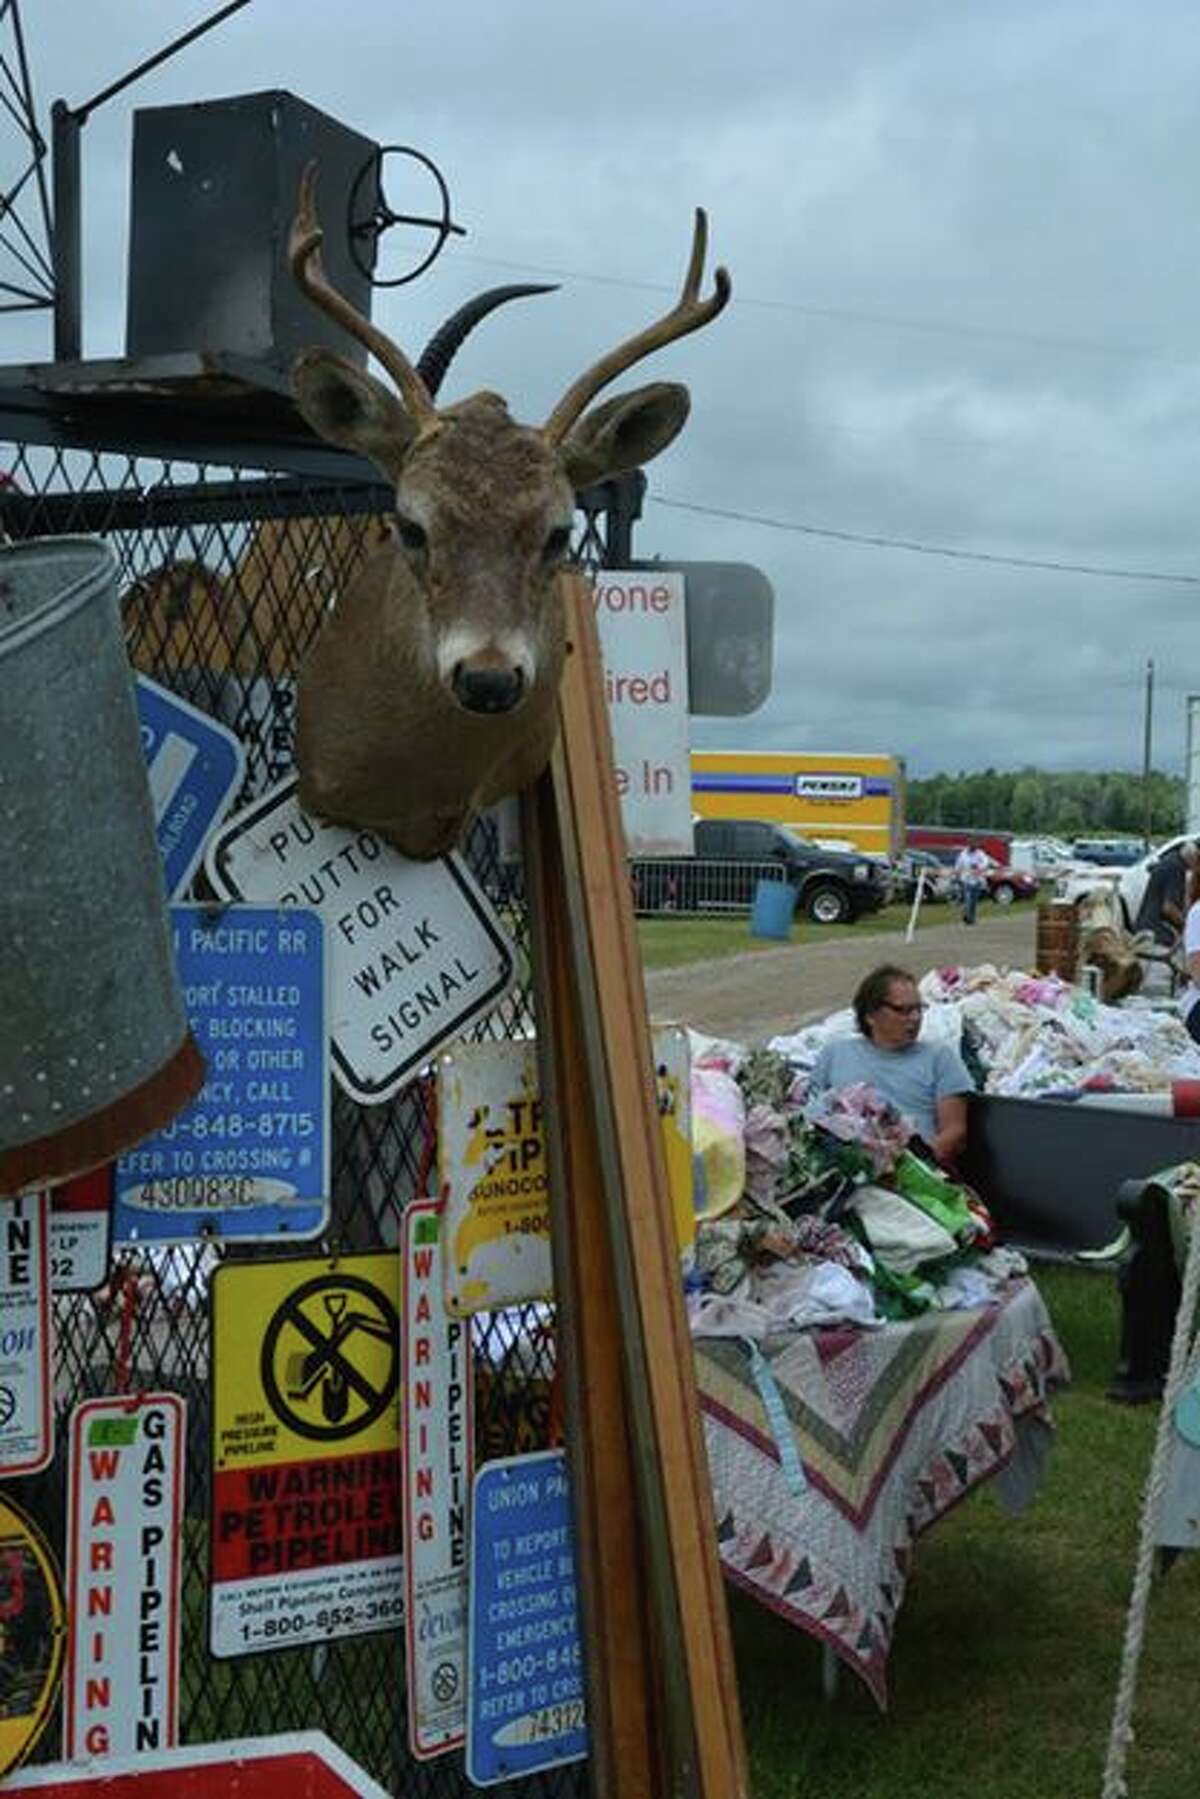 Antique festival in Midland this weekend